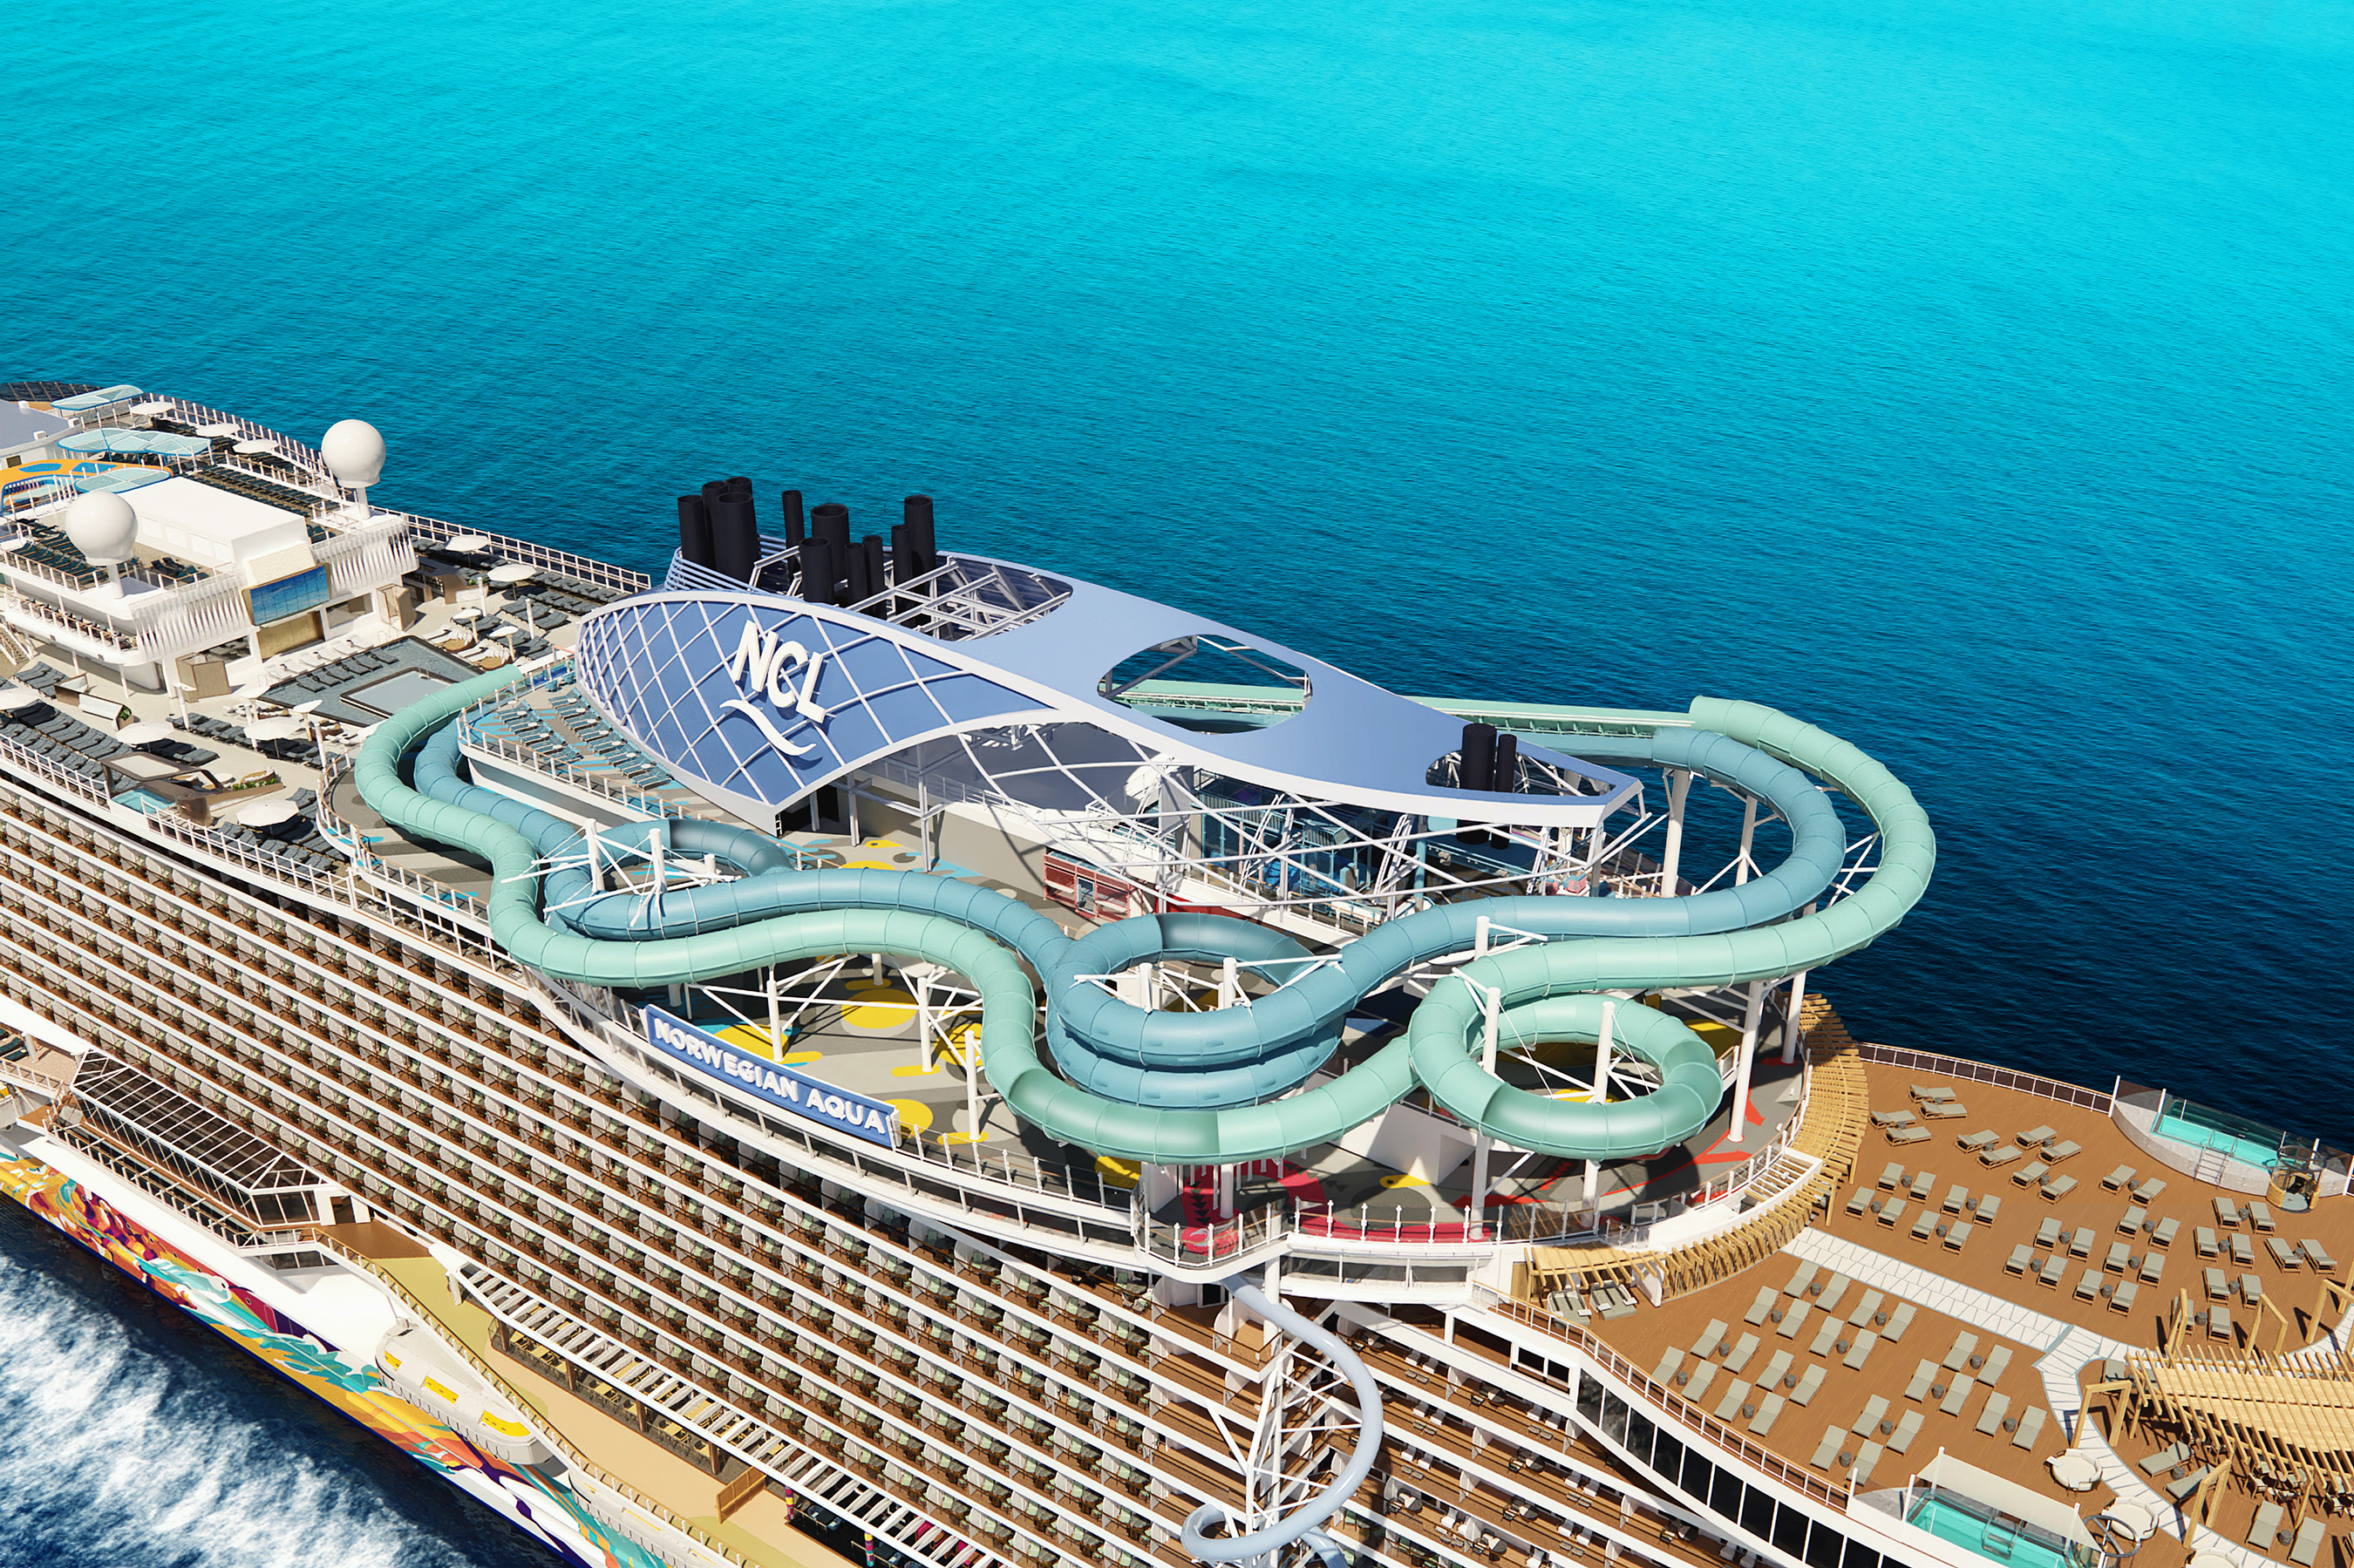 Norwegian Cruise Line, the innovator in global cruise travel, will debut the world’s first-ever hybrid waterslide and rollercoaster on board the Company's upcoming ship, Norwegian Aqua.